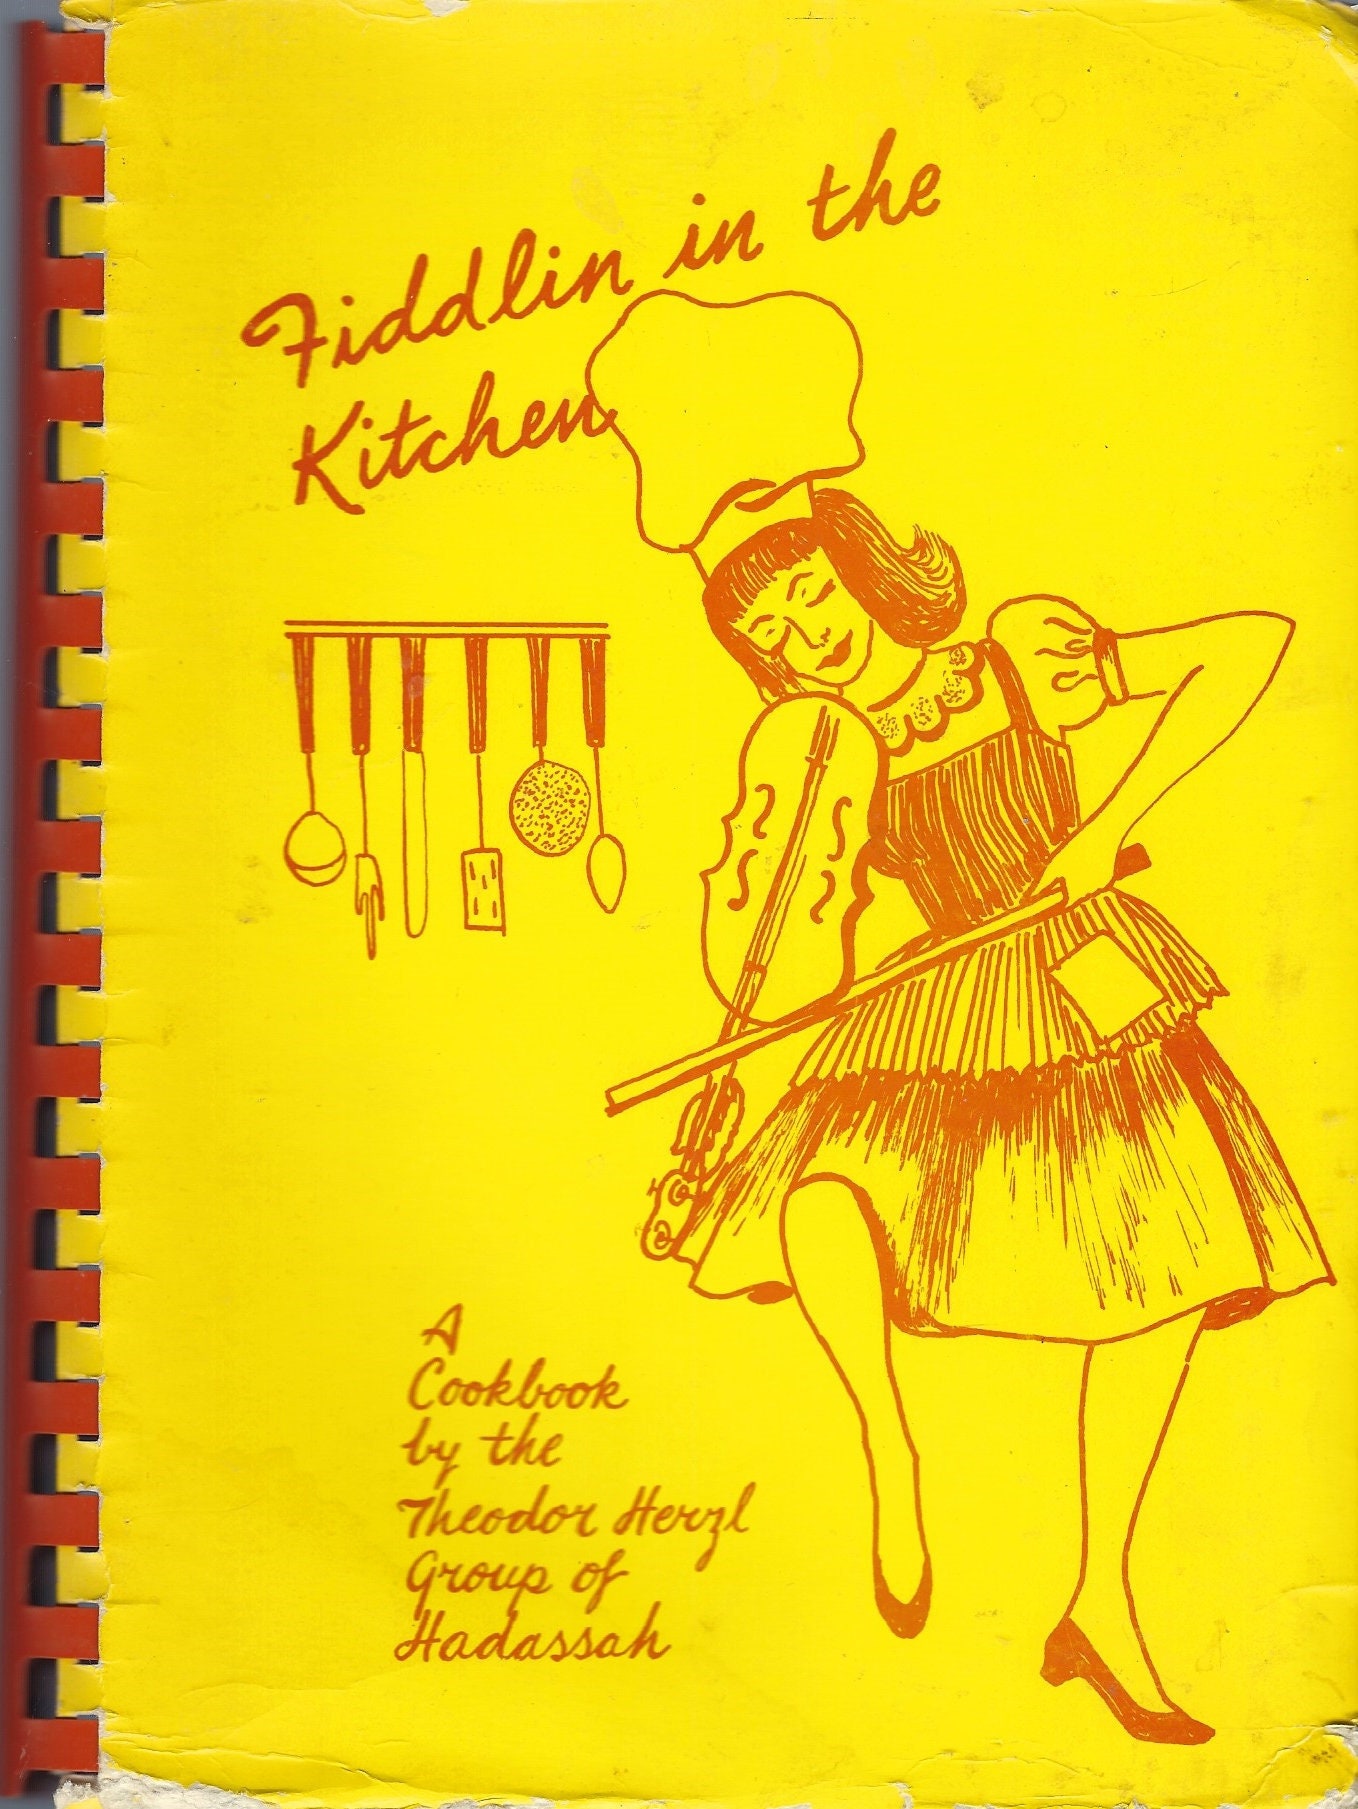 Camden County New Jersey 1968 Vintage Hadassah Ethnic Jewish Fiddler in The Kitchen Cookbook Nj Community Holiday Recipes & More Rare Book